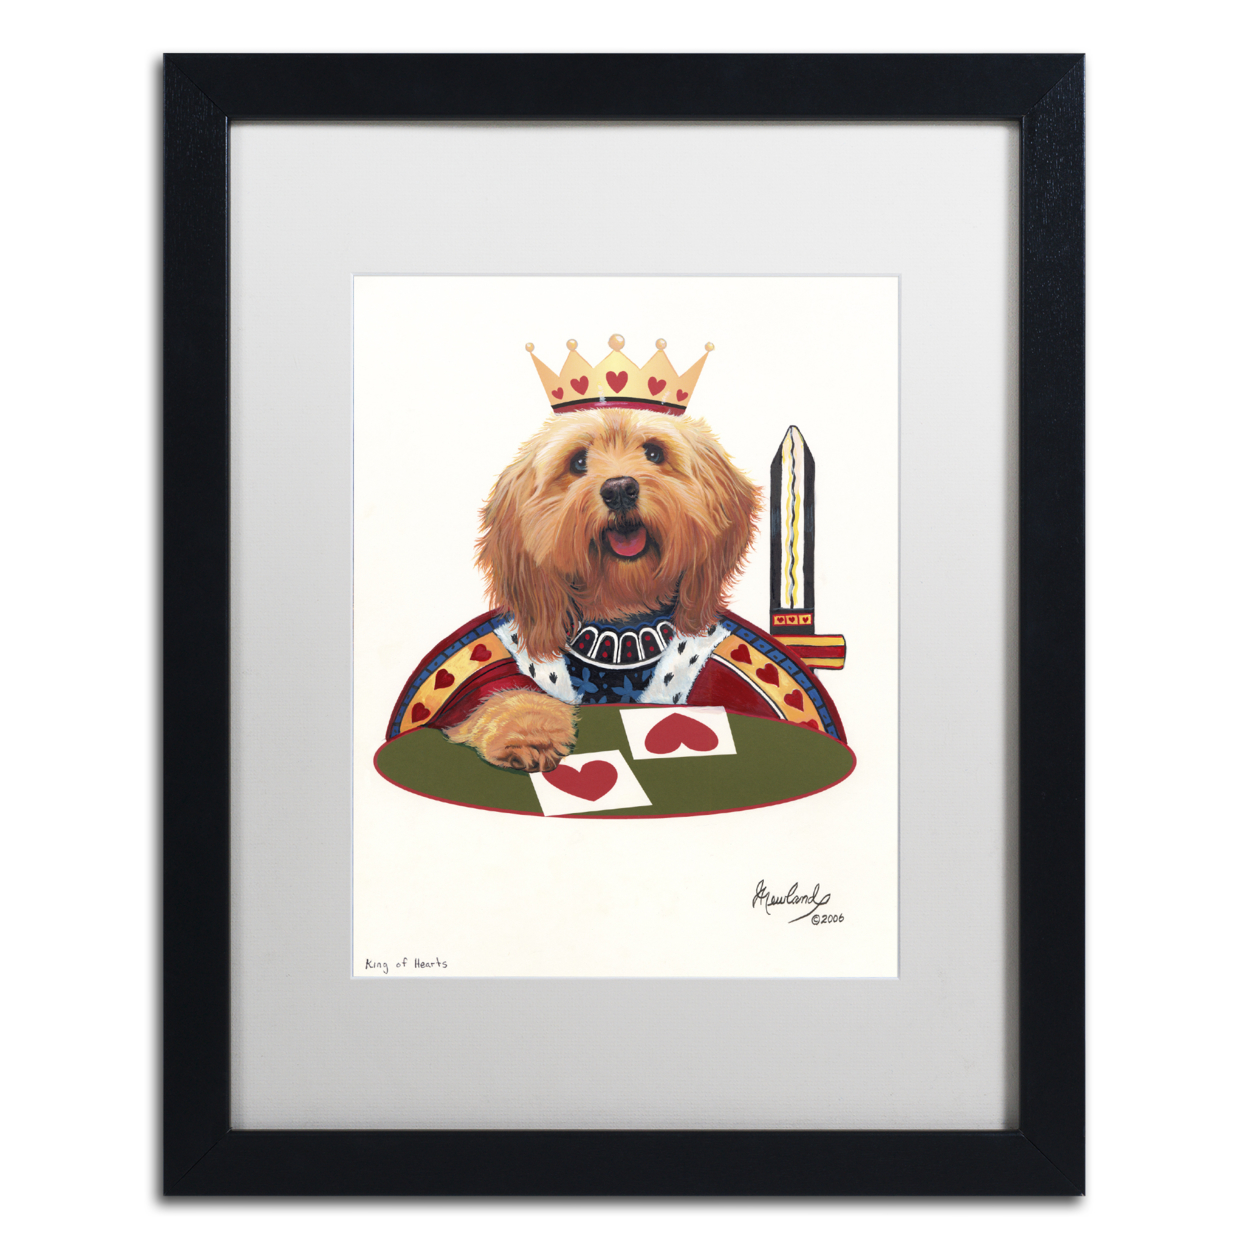 Jenny Newland 'King Of Hearts' Black Wooden Framed Art 18 X 22 Inches